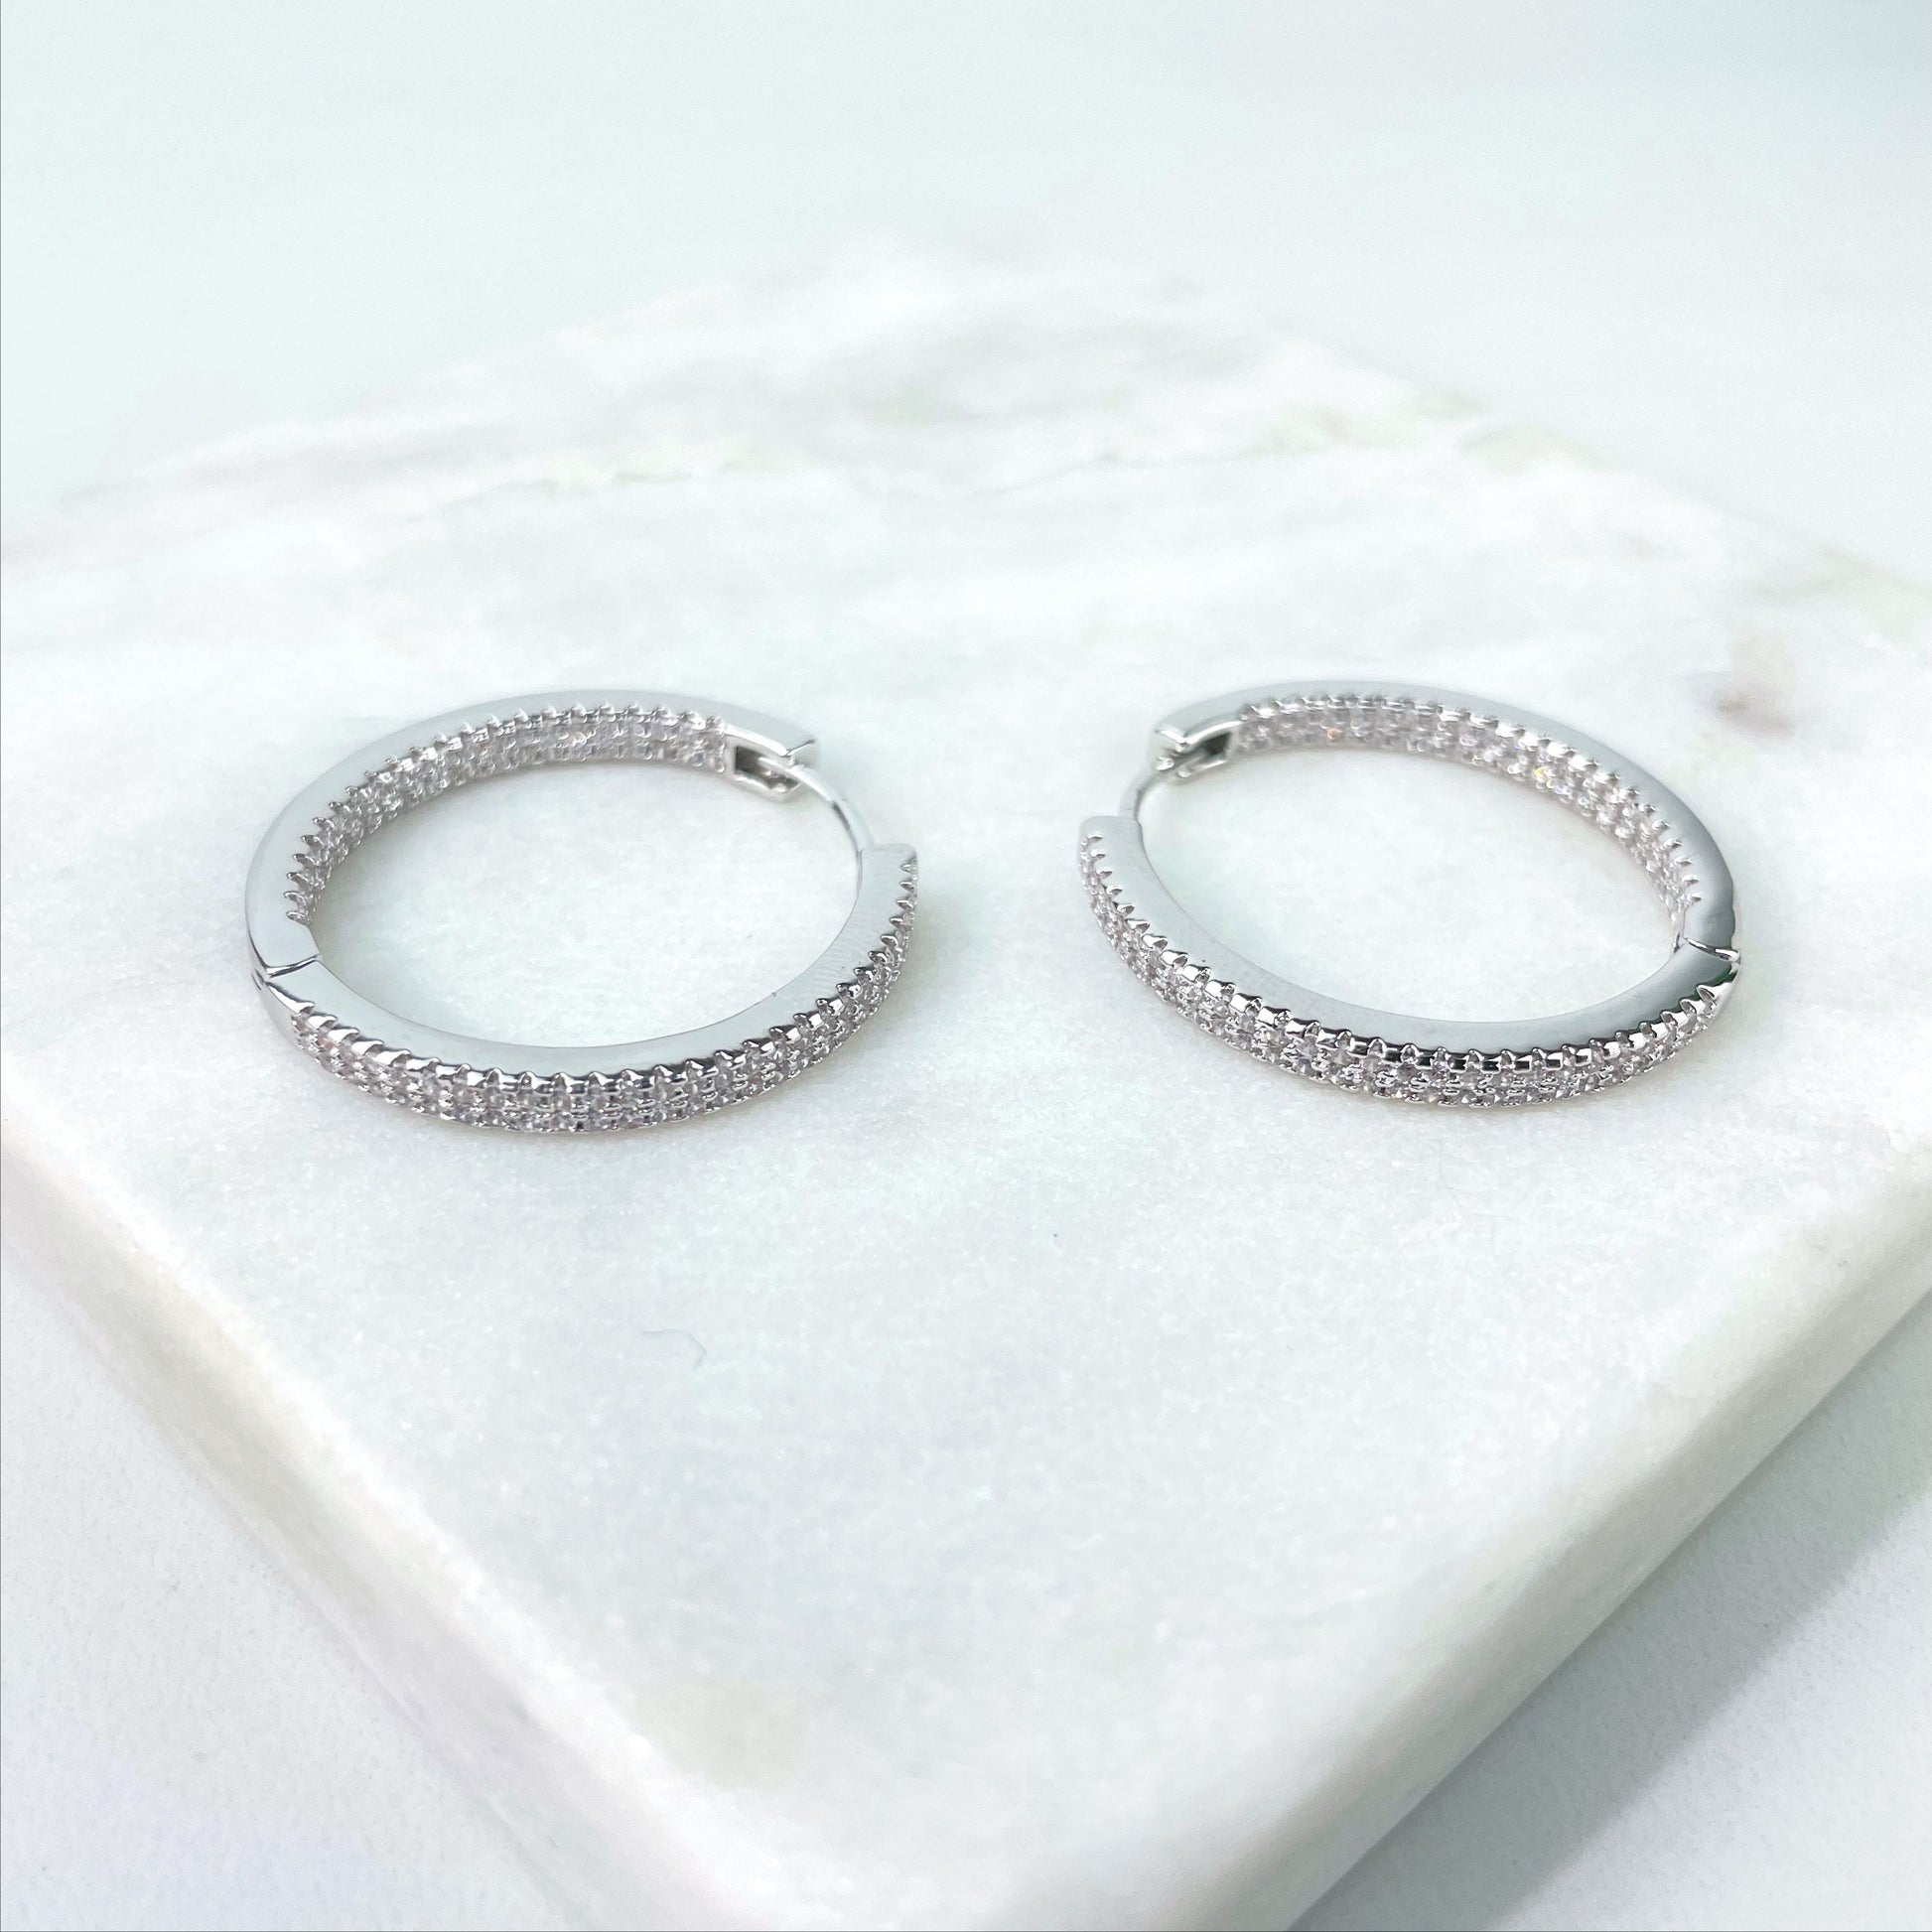 Silver Filled 30mm Clear Micro Pave Cubic Zirconia Hoop Huggie Earrings, Minimalist Jewelry, Wholesale Jewelry Making Supplies